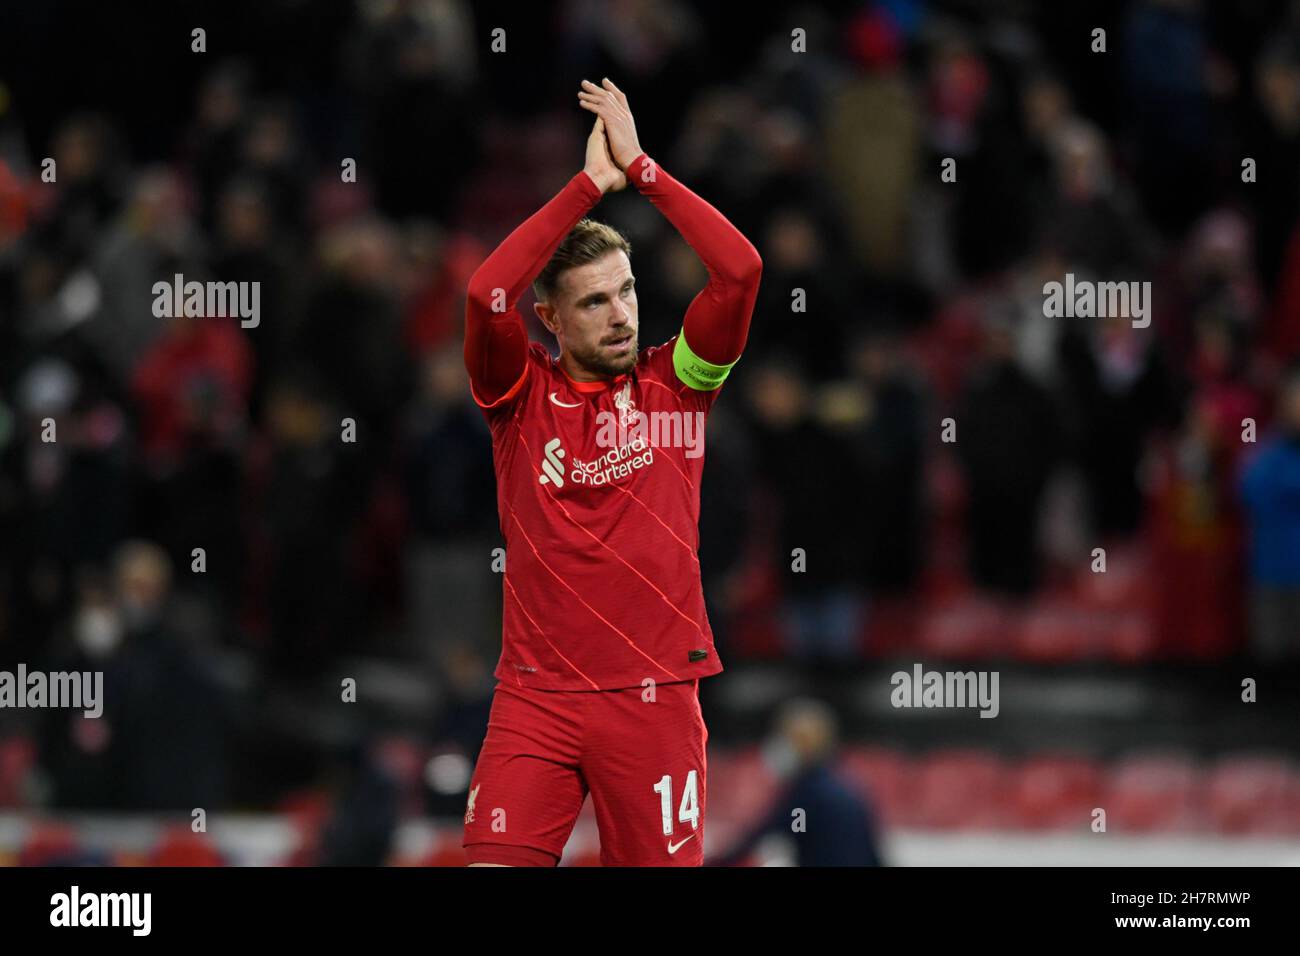 Jordan Henderson #14 of Liverpool applauds the home supporters at the end of the game after his side beat FC Porto 2-0 Stock Photo